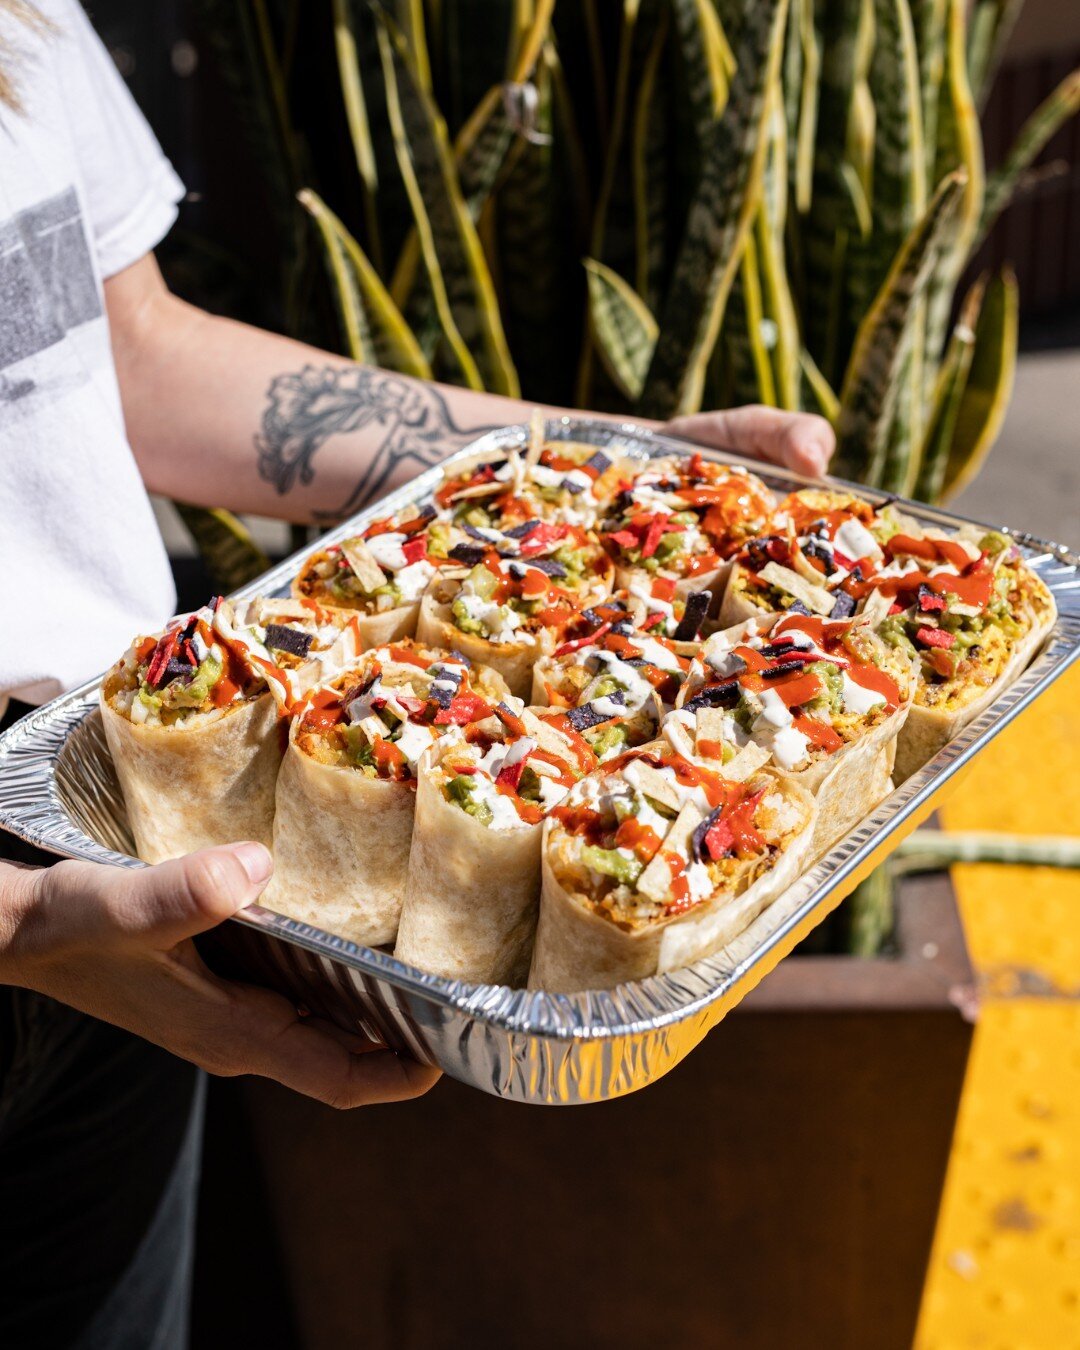 As sure as the sun will rise... breakfast burritos will be a hit. Feed your friends, co-workers, and family with our burrito boxes! Order catering online through our website and no one will be left hungry. 🌯